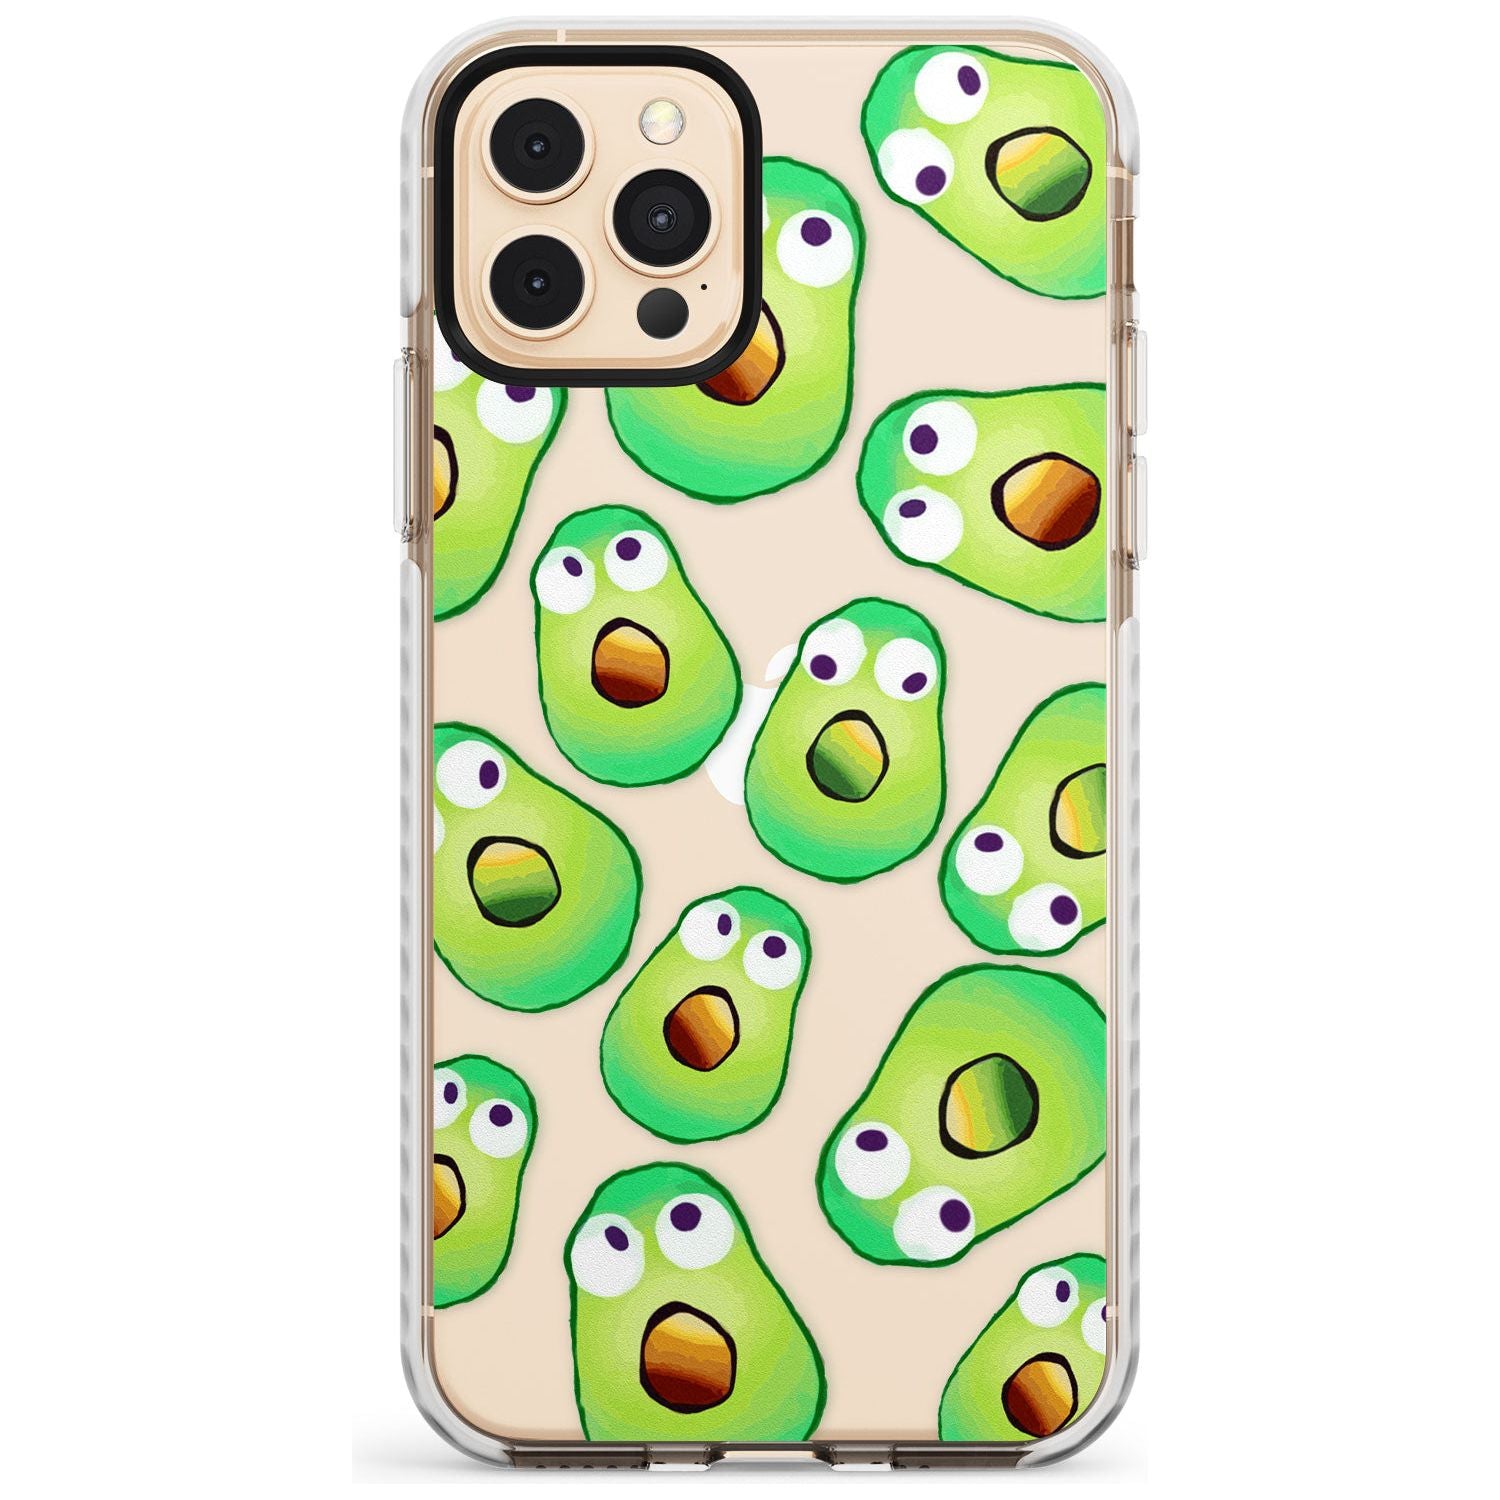 Shocked Avocados Impact Phone Case for iPhone 11 Pro Max